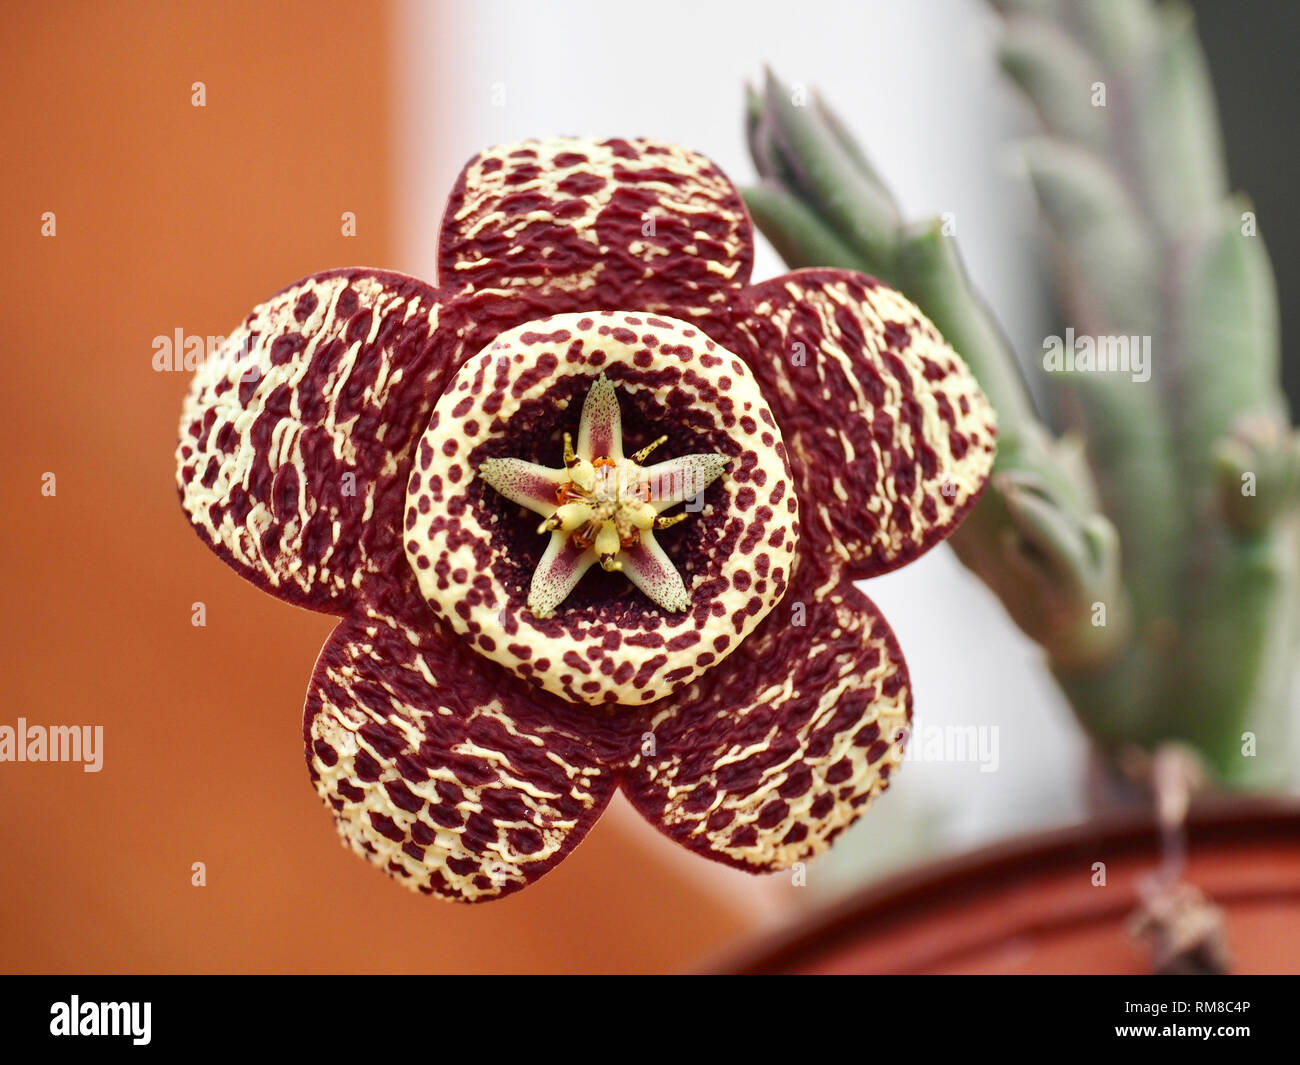 Huernia flower blooming in the winter Stock Photo